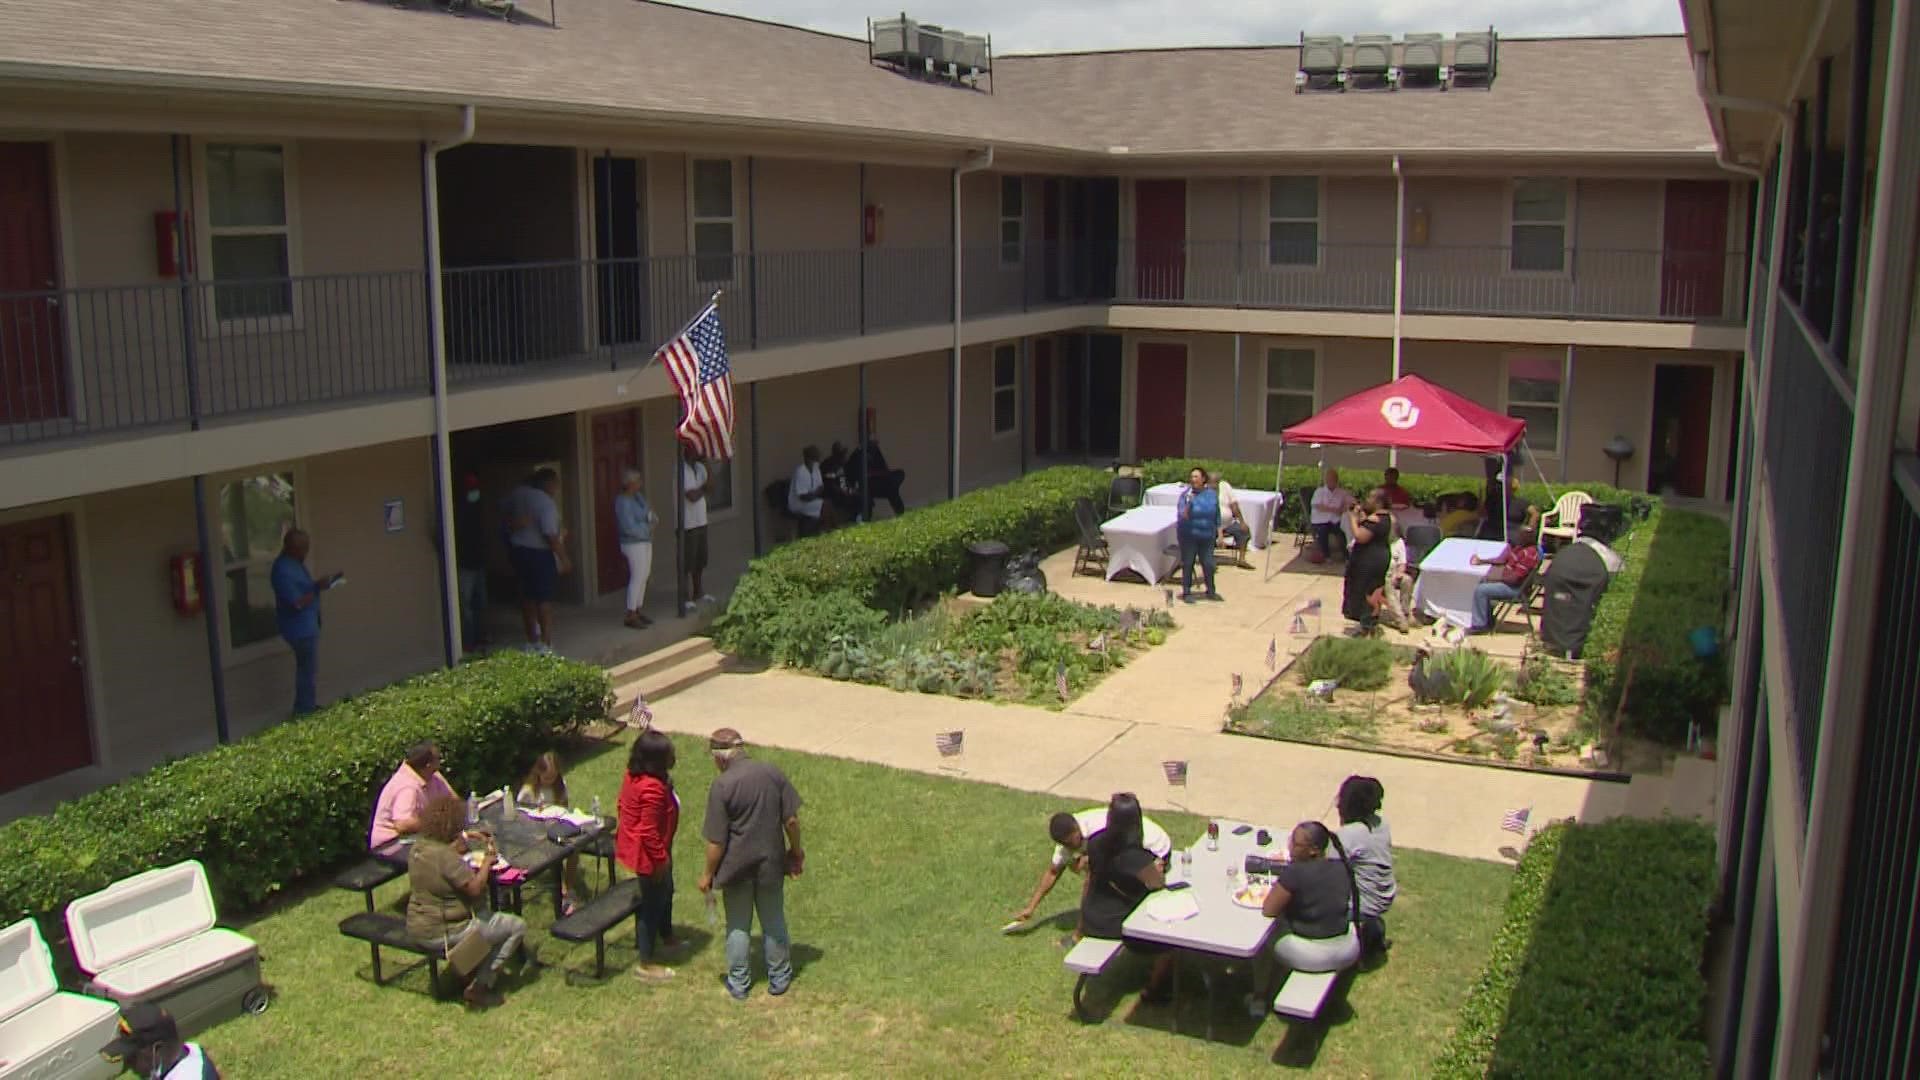 Community honors fallen service members at Heroes House, which provides affordable housing for veterans.